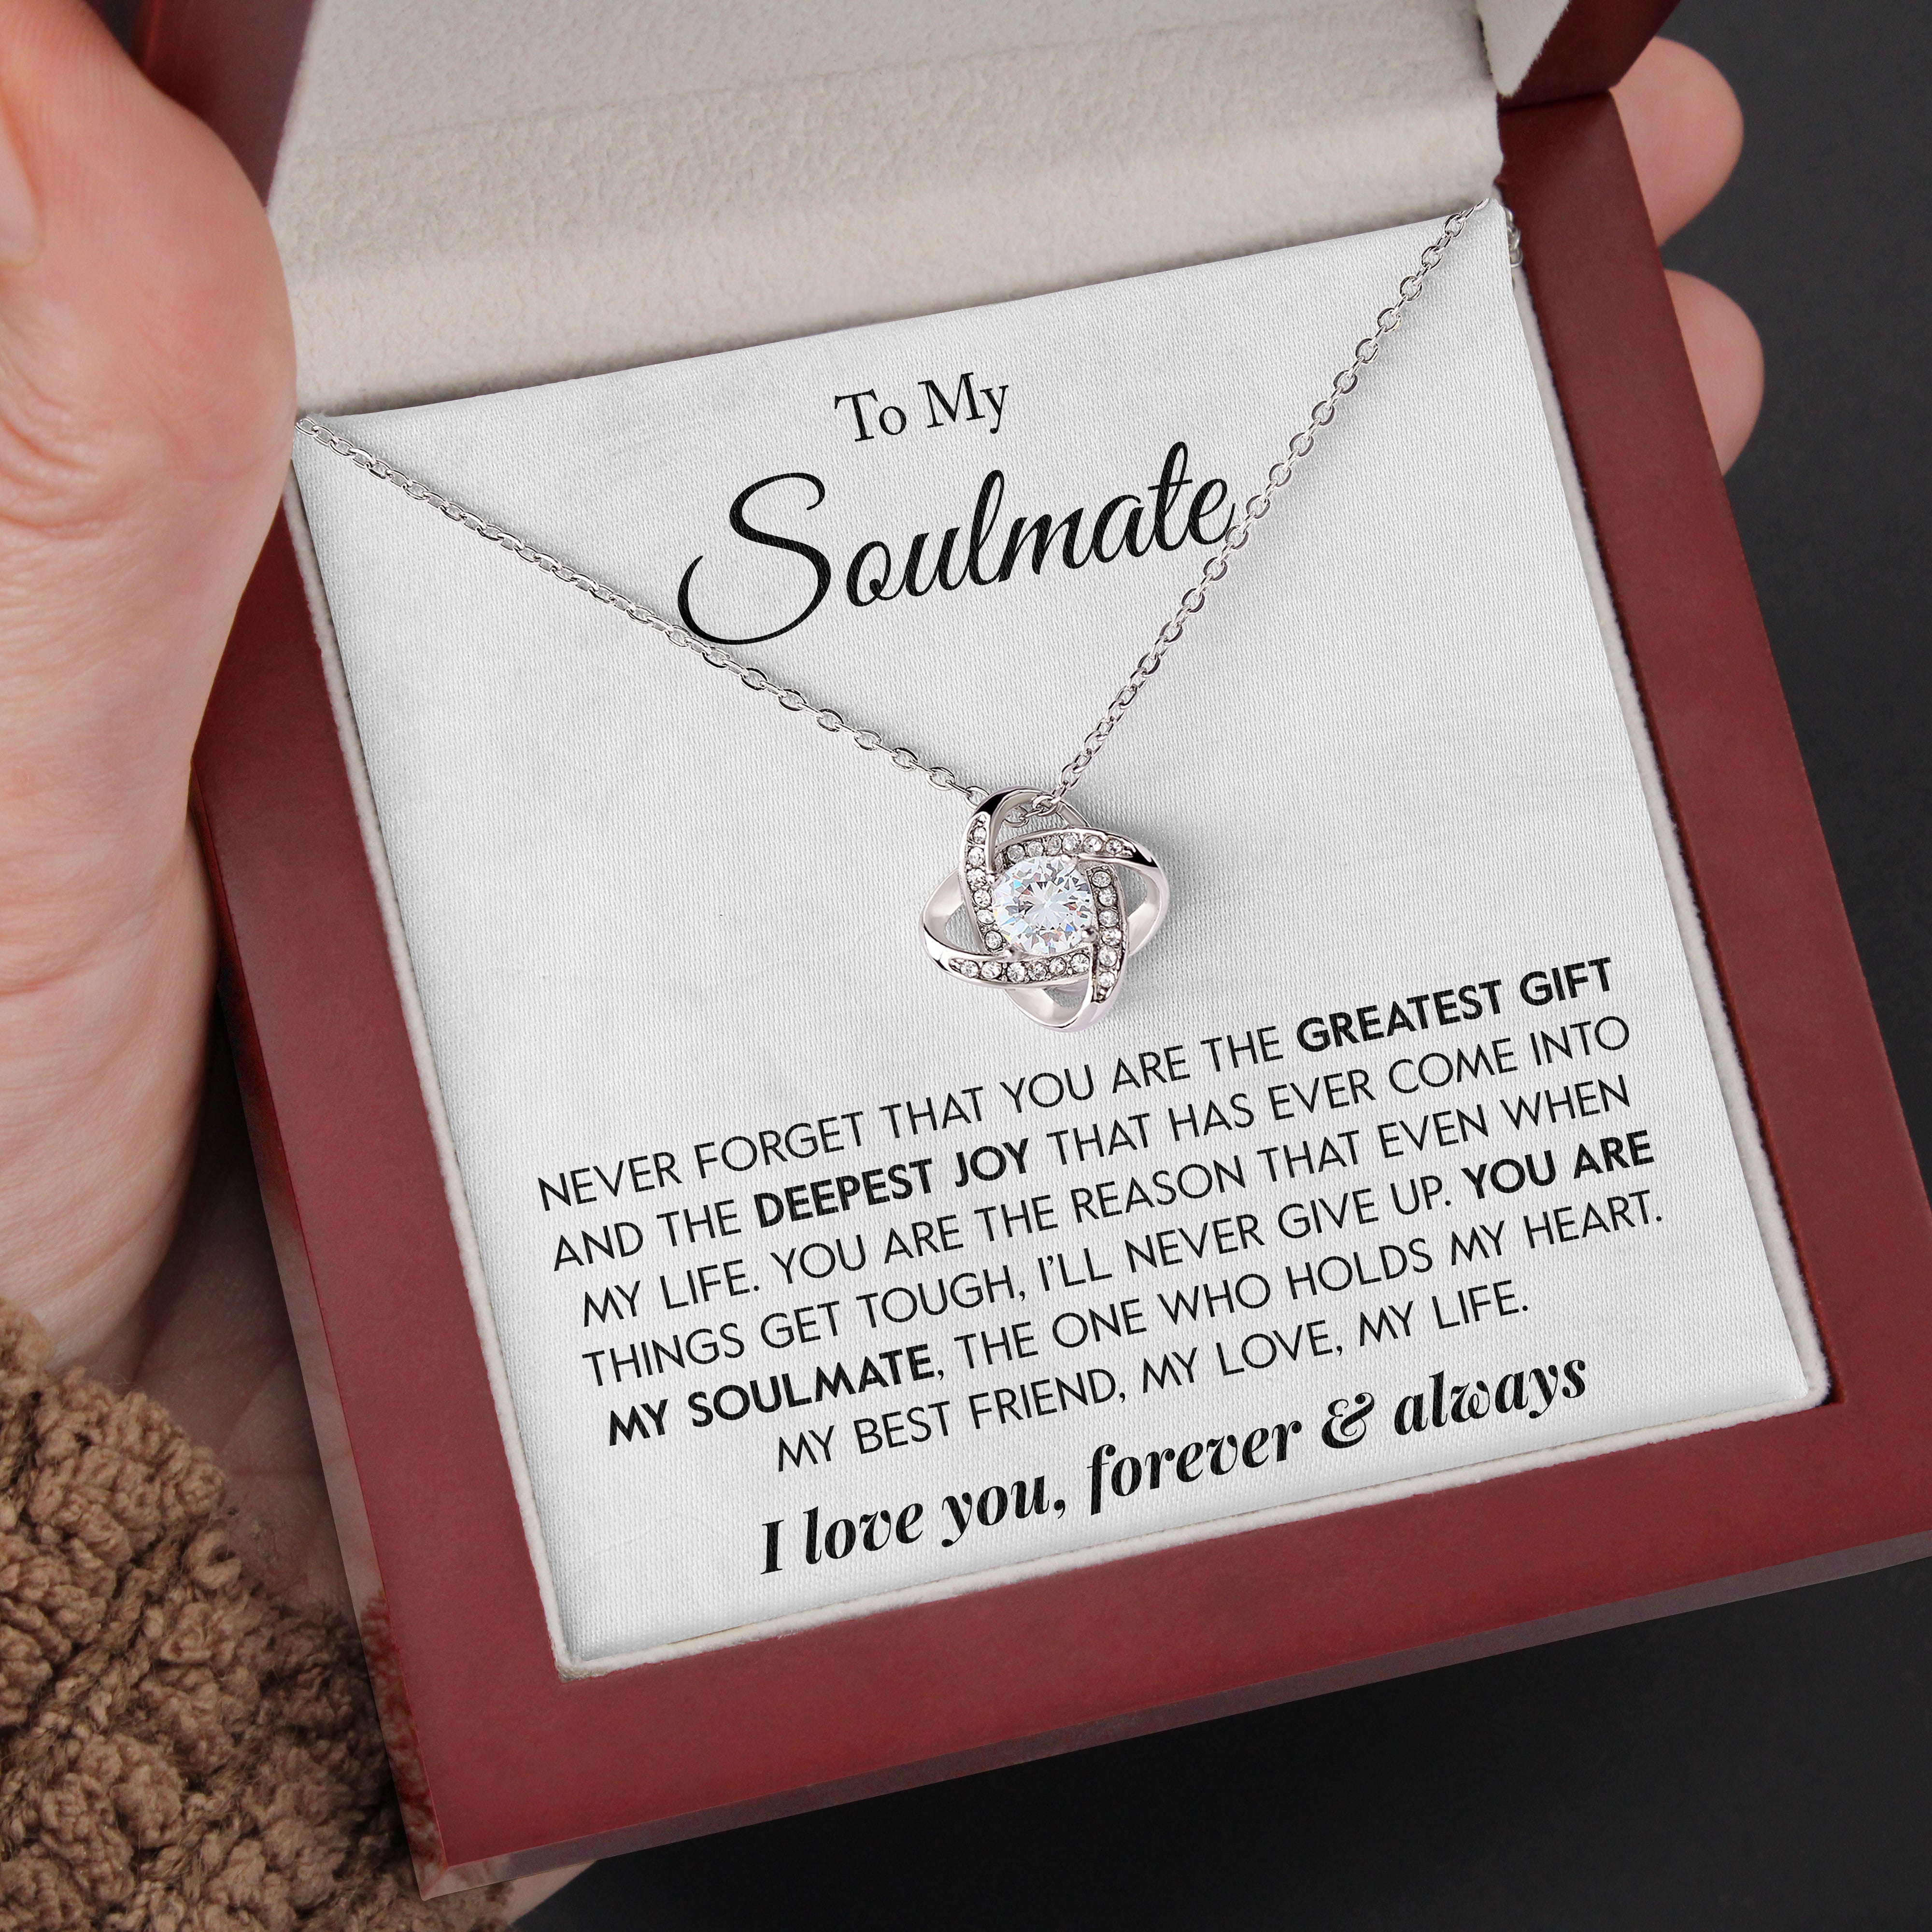 To My Soulmate | "The Greatest Gift" | Love Knot Necklace